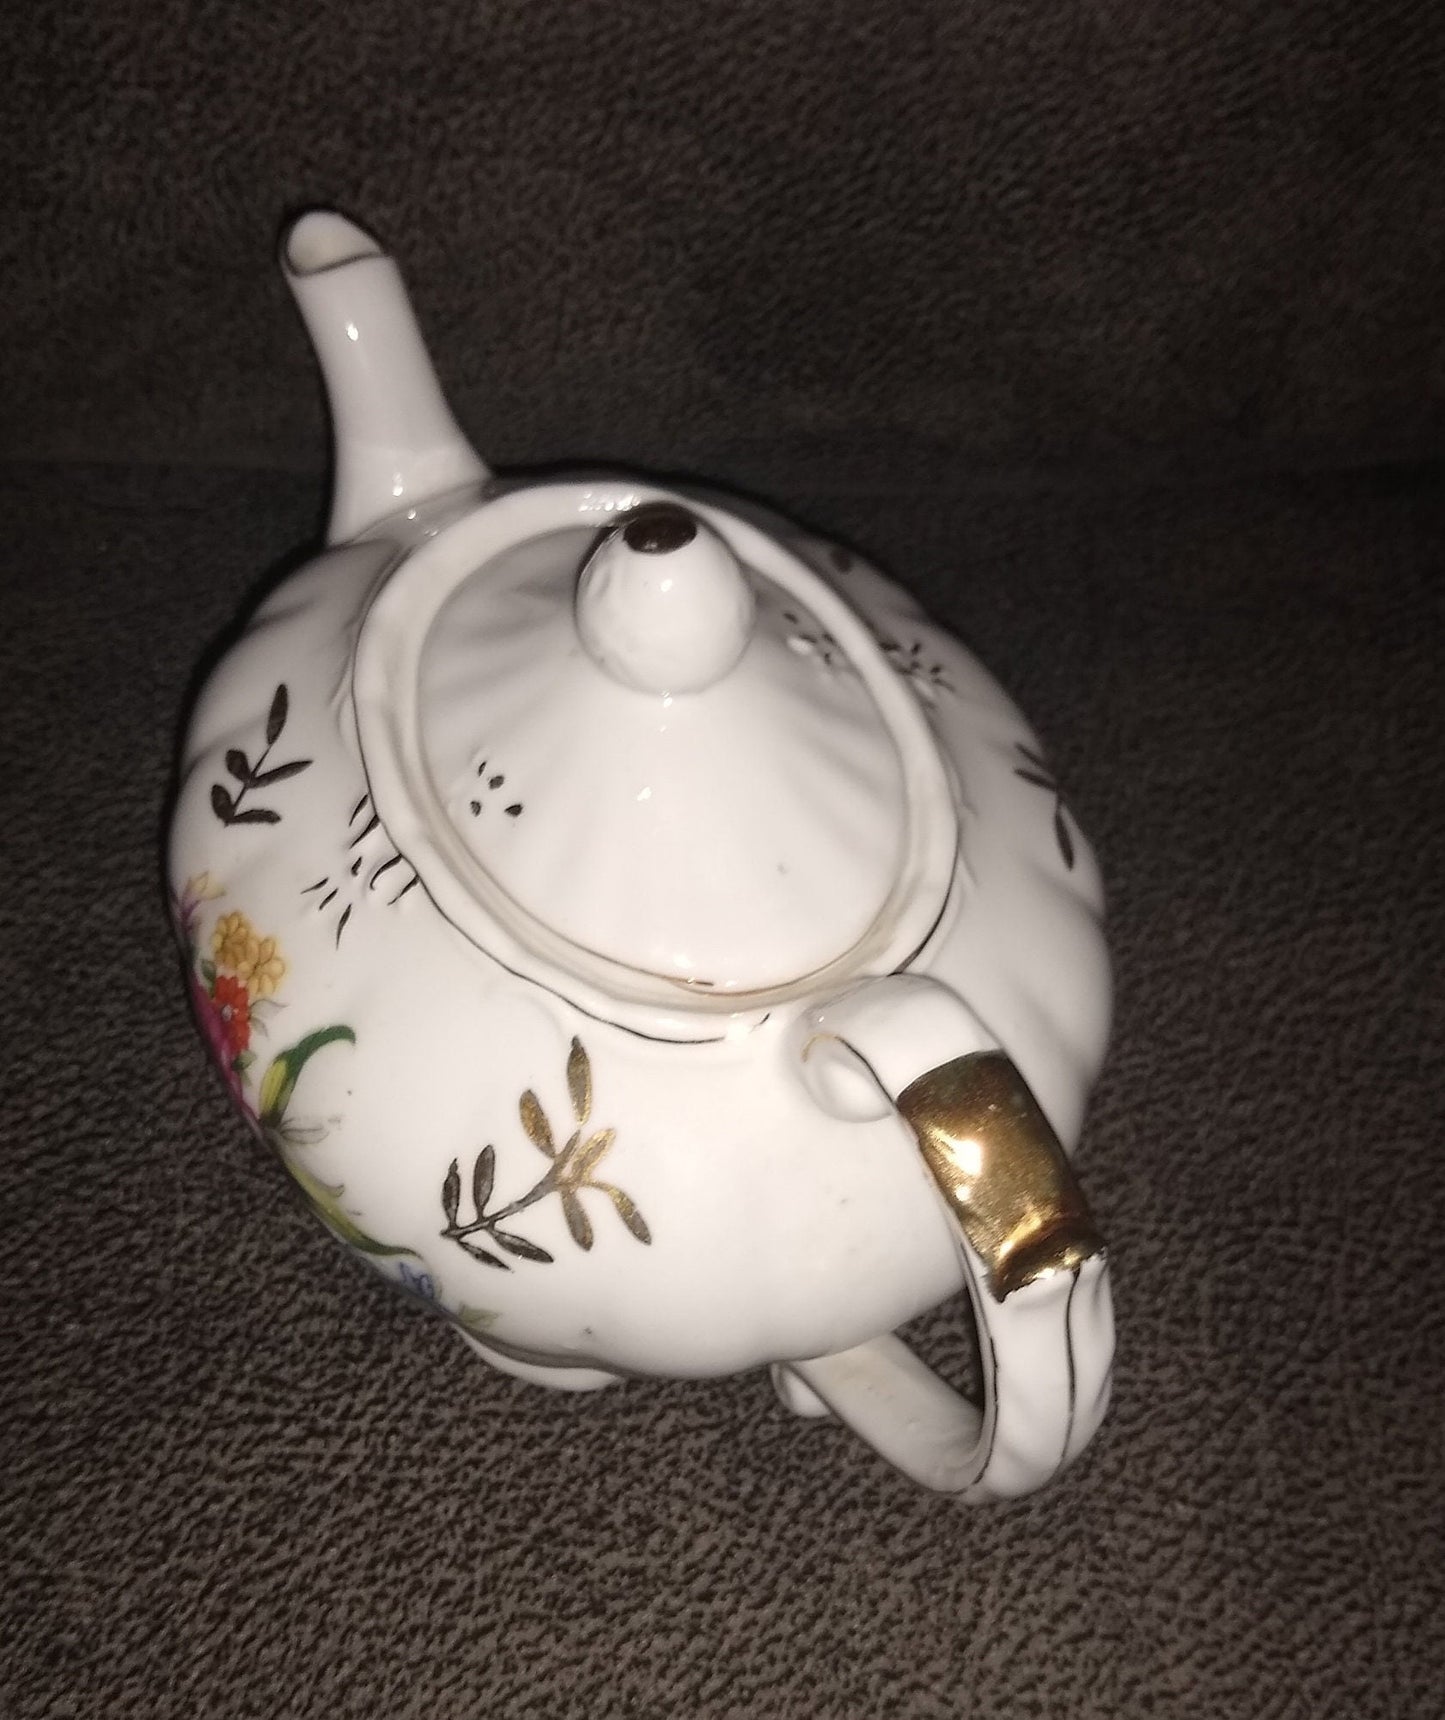 Vintage Musical Tea Pot Wind Up Rose Floral Gold Trim, Made in Japan In 1960's. Tea For Two Song.